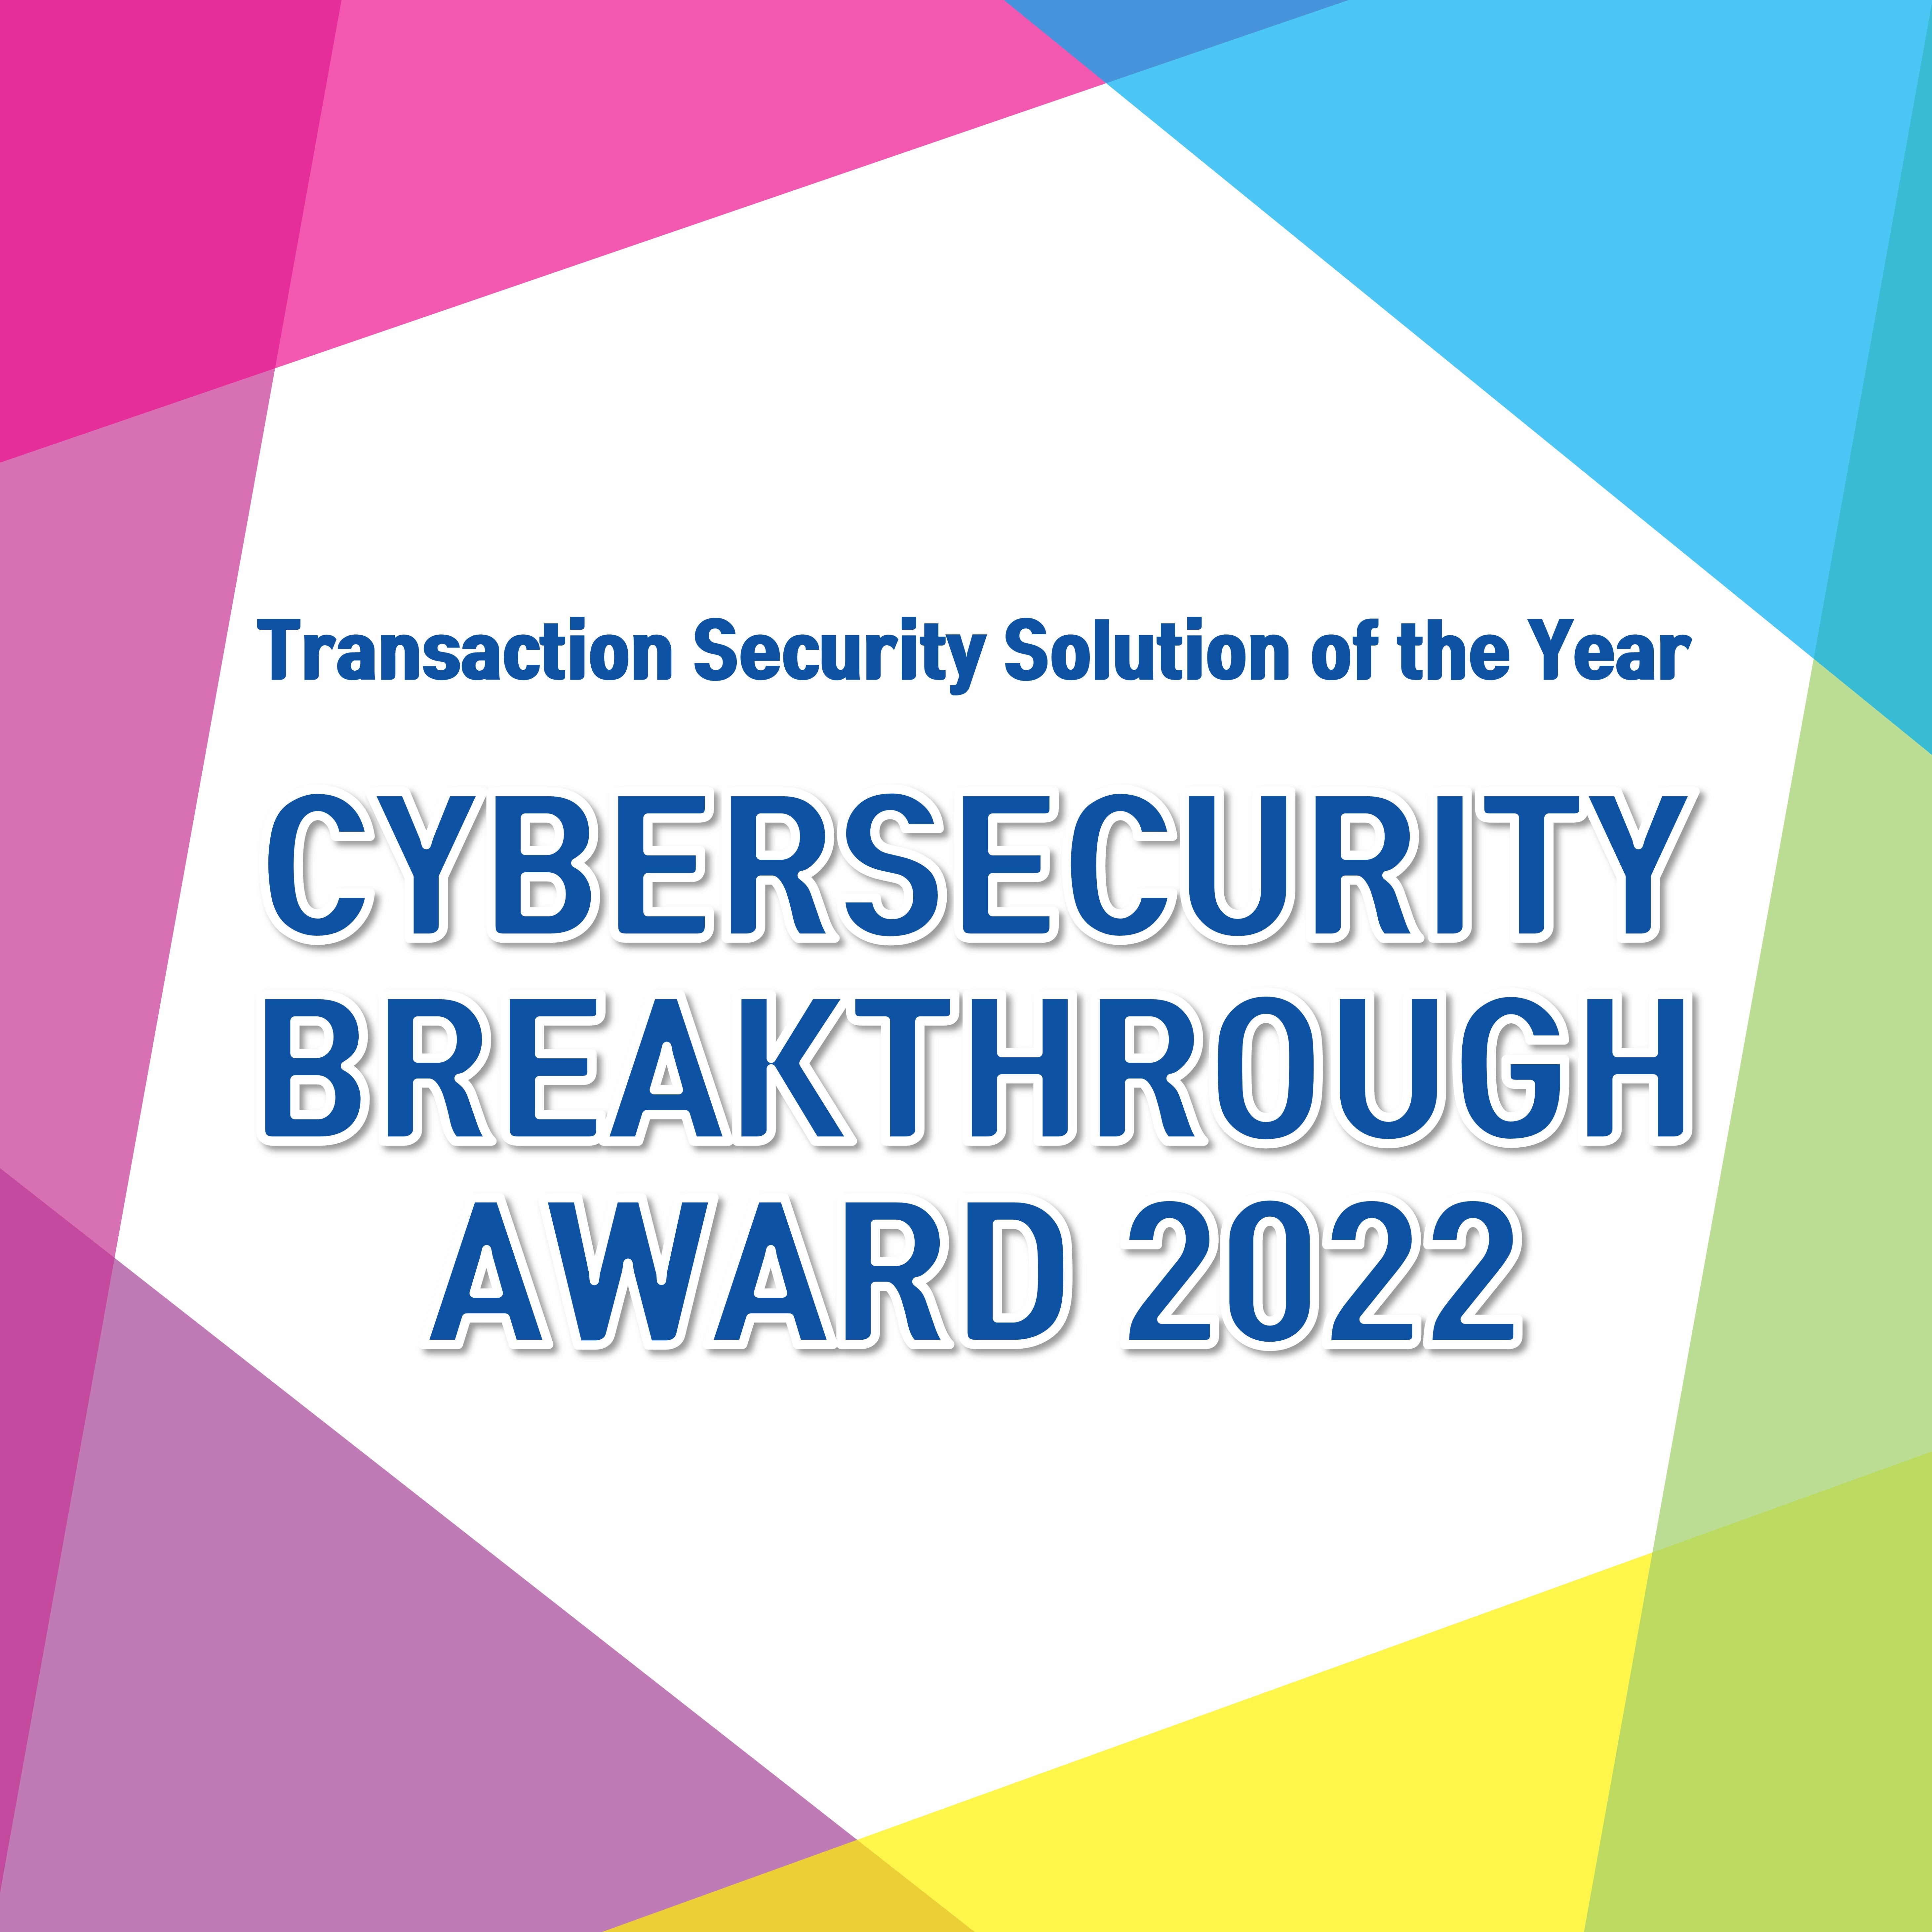 'Transaction Security Solution of the Year